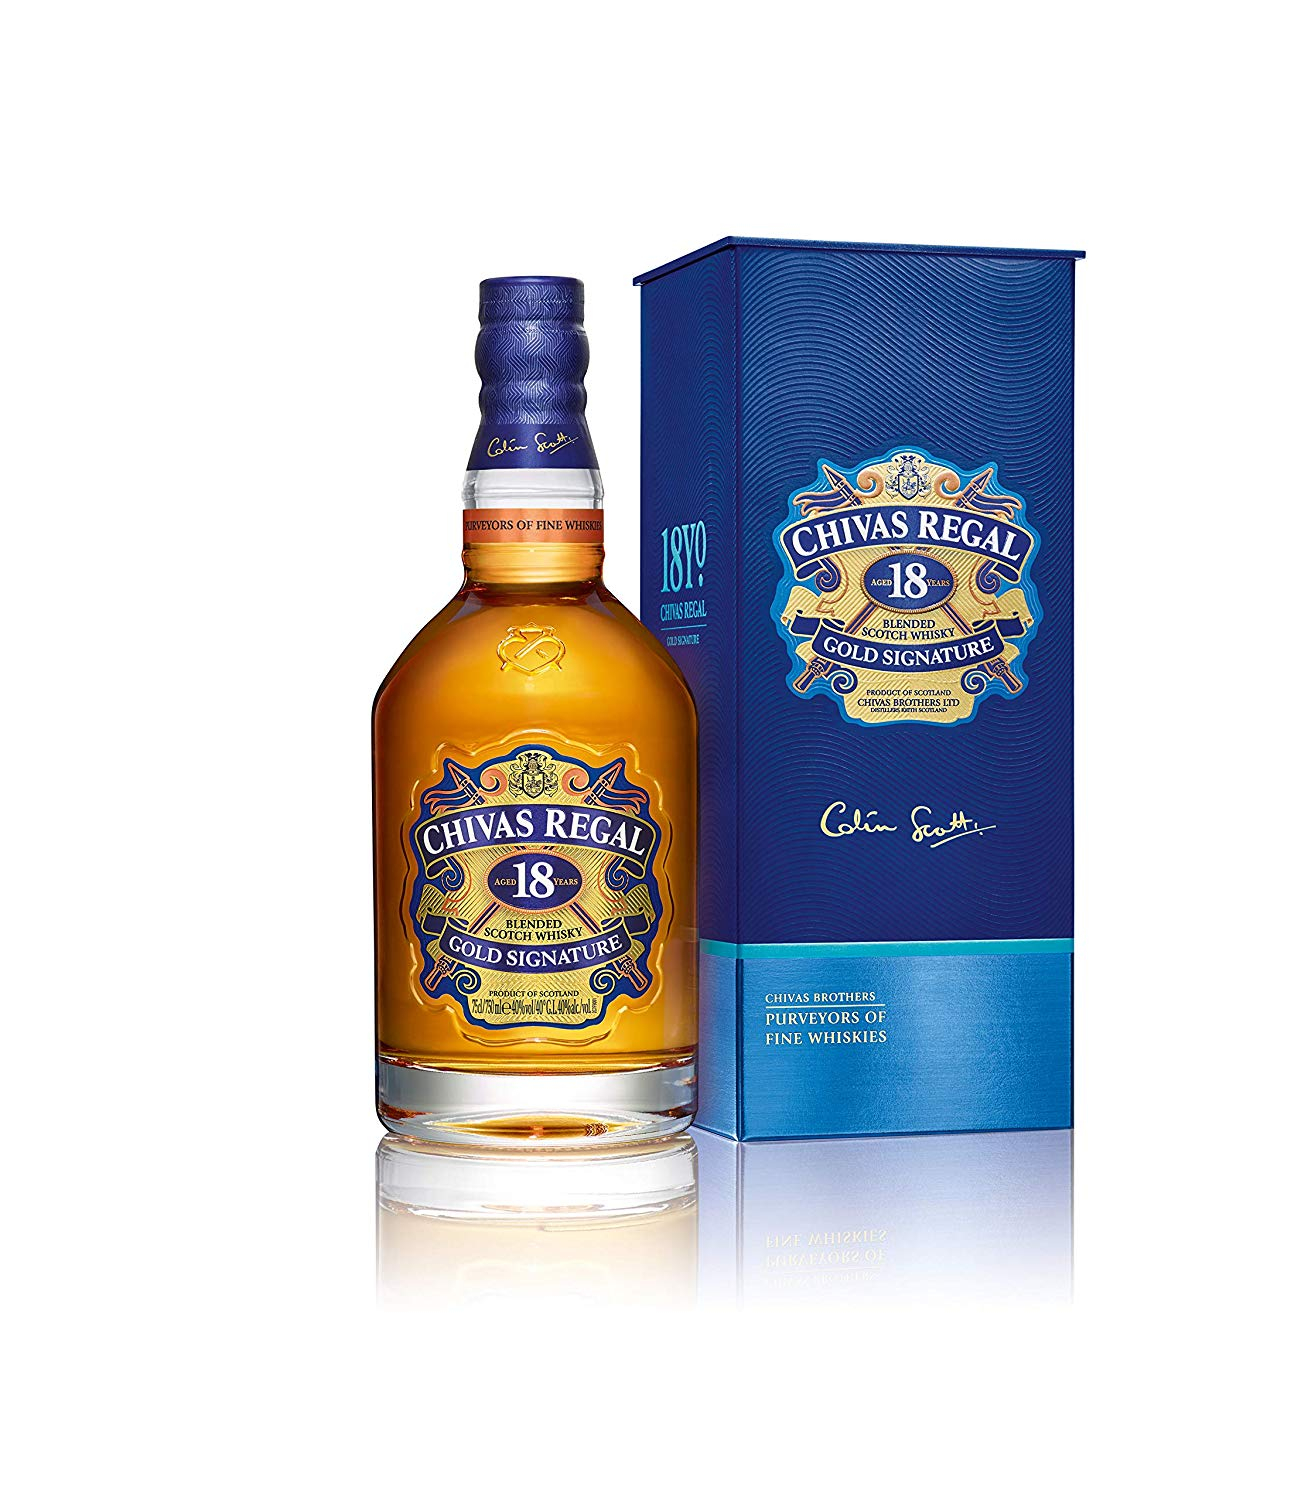 Chivas Regal 18 Year Old Blended Scotch Whisky 70cl - £40